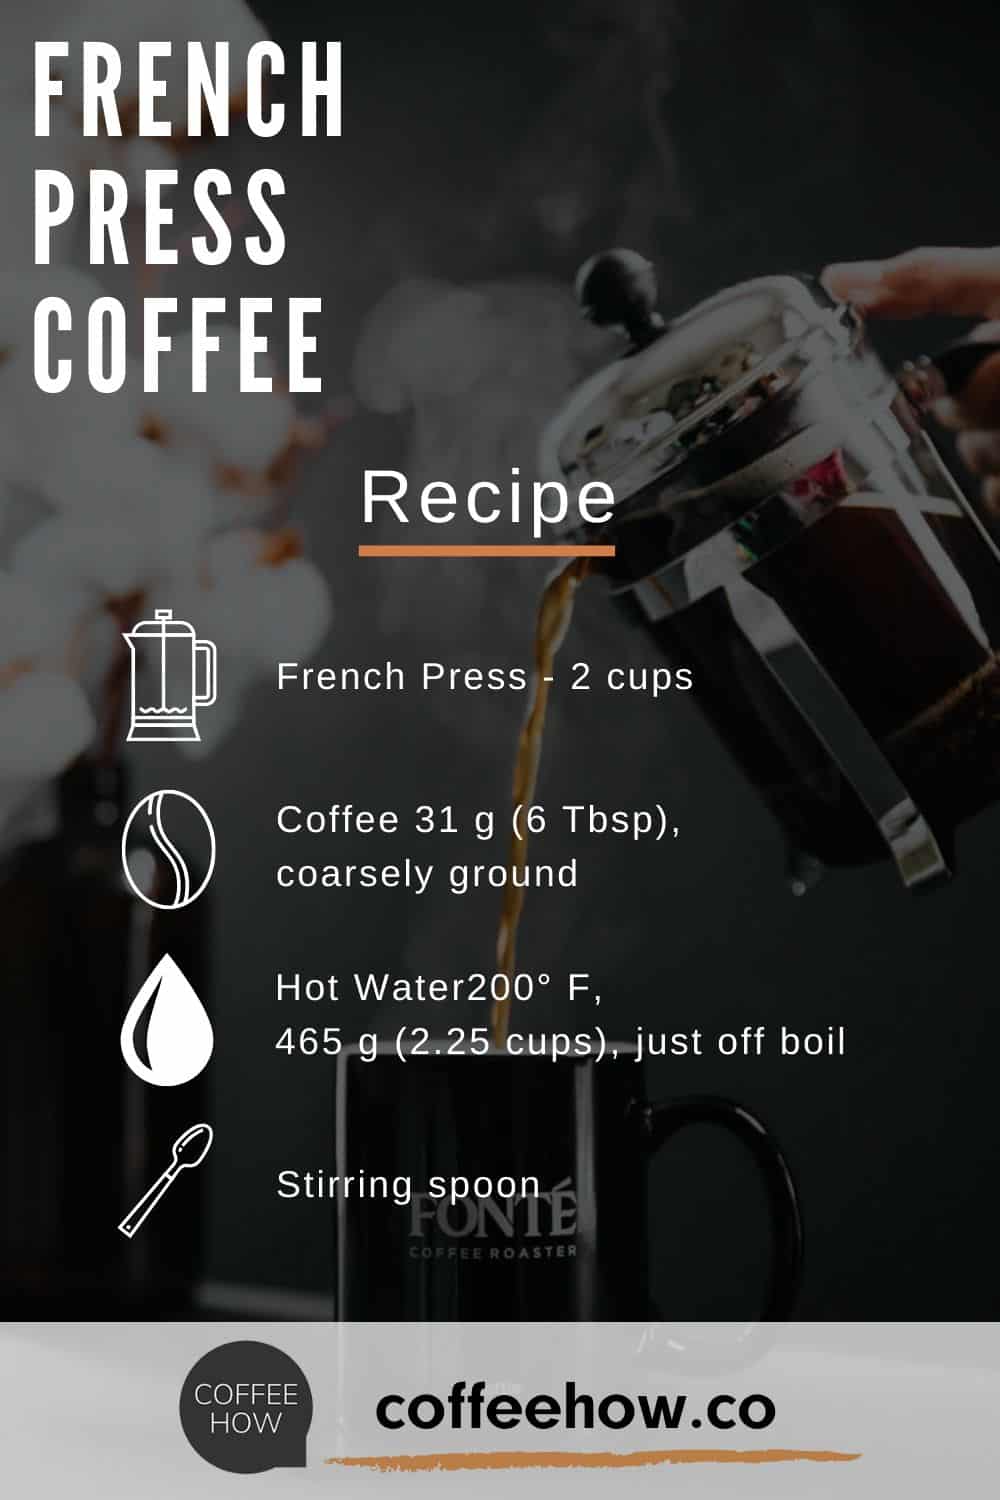 How to French Press: Step by step brew guide